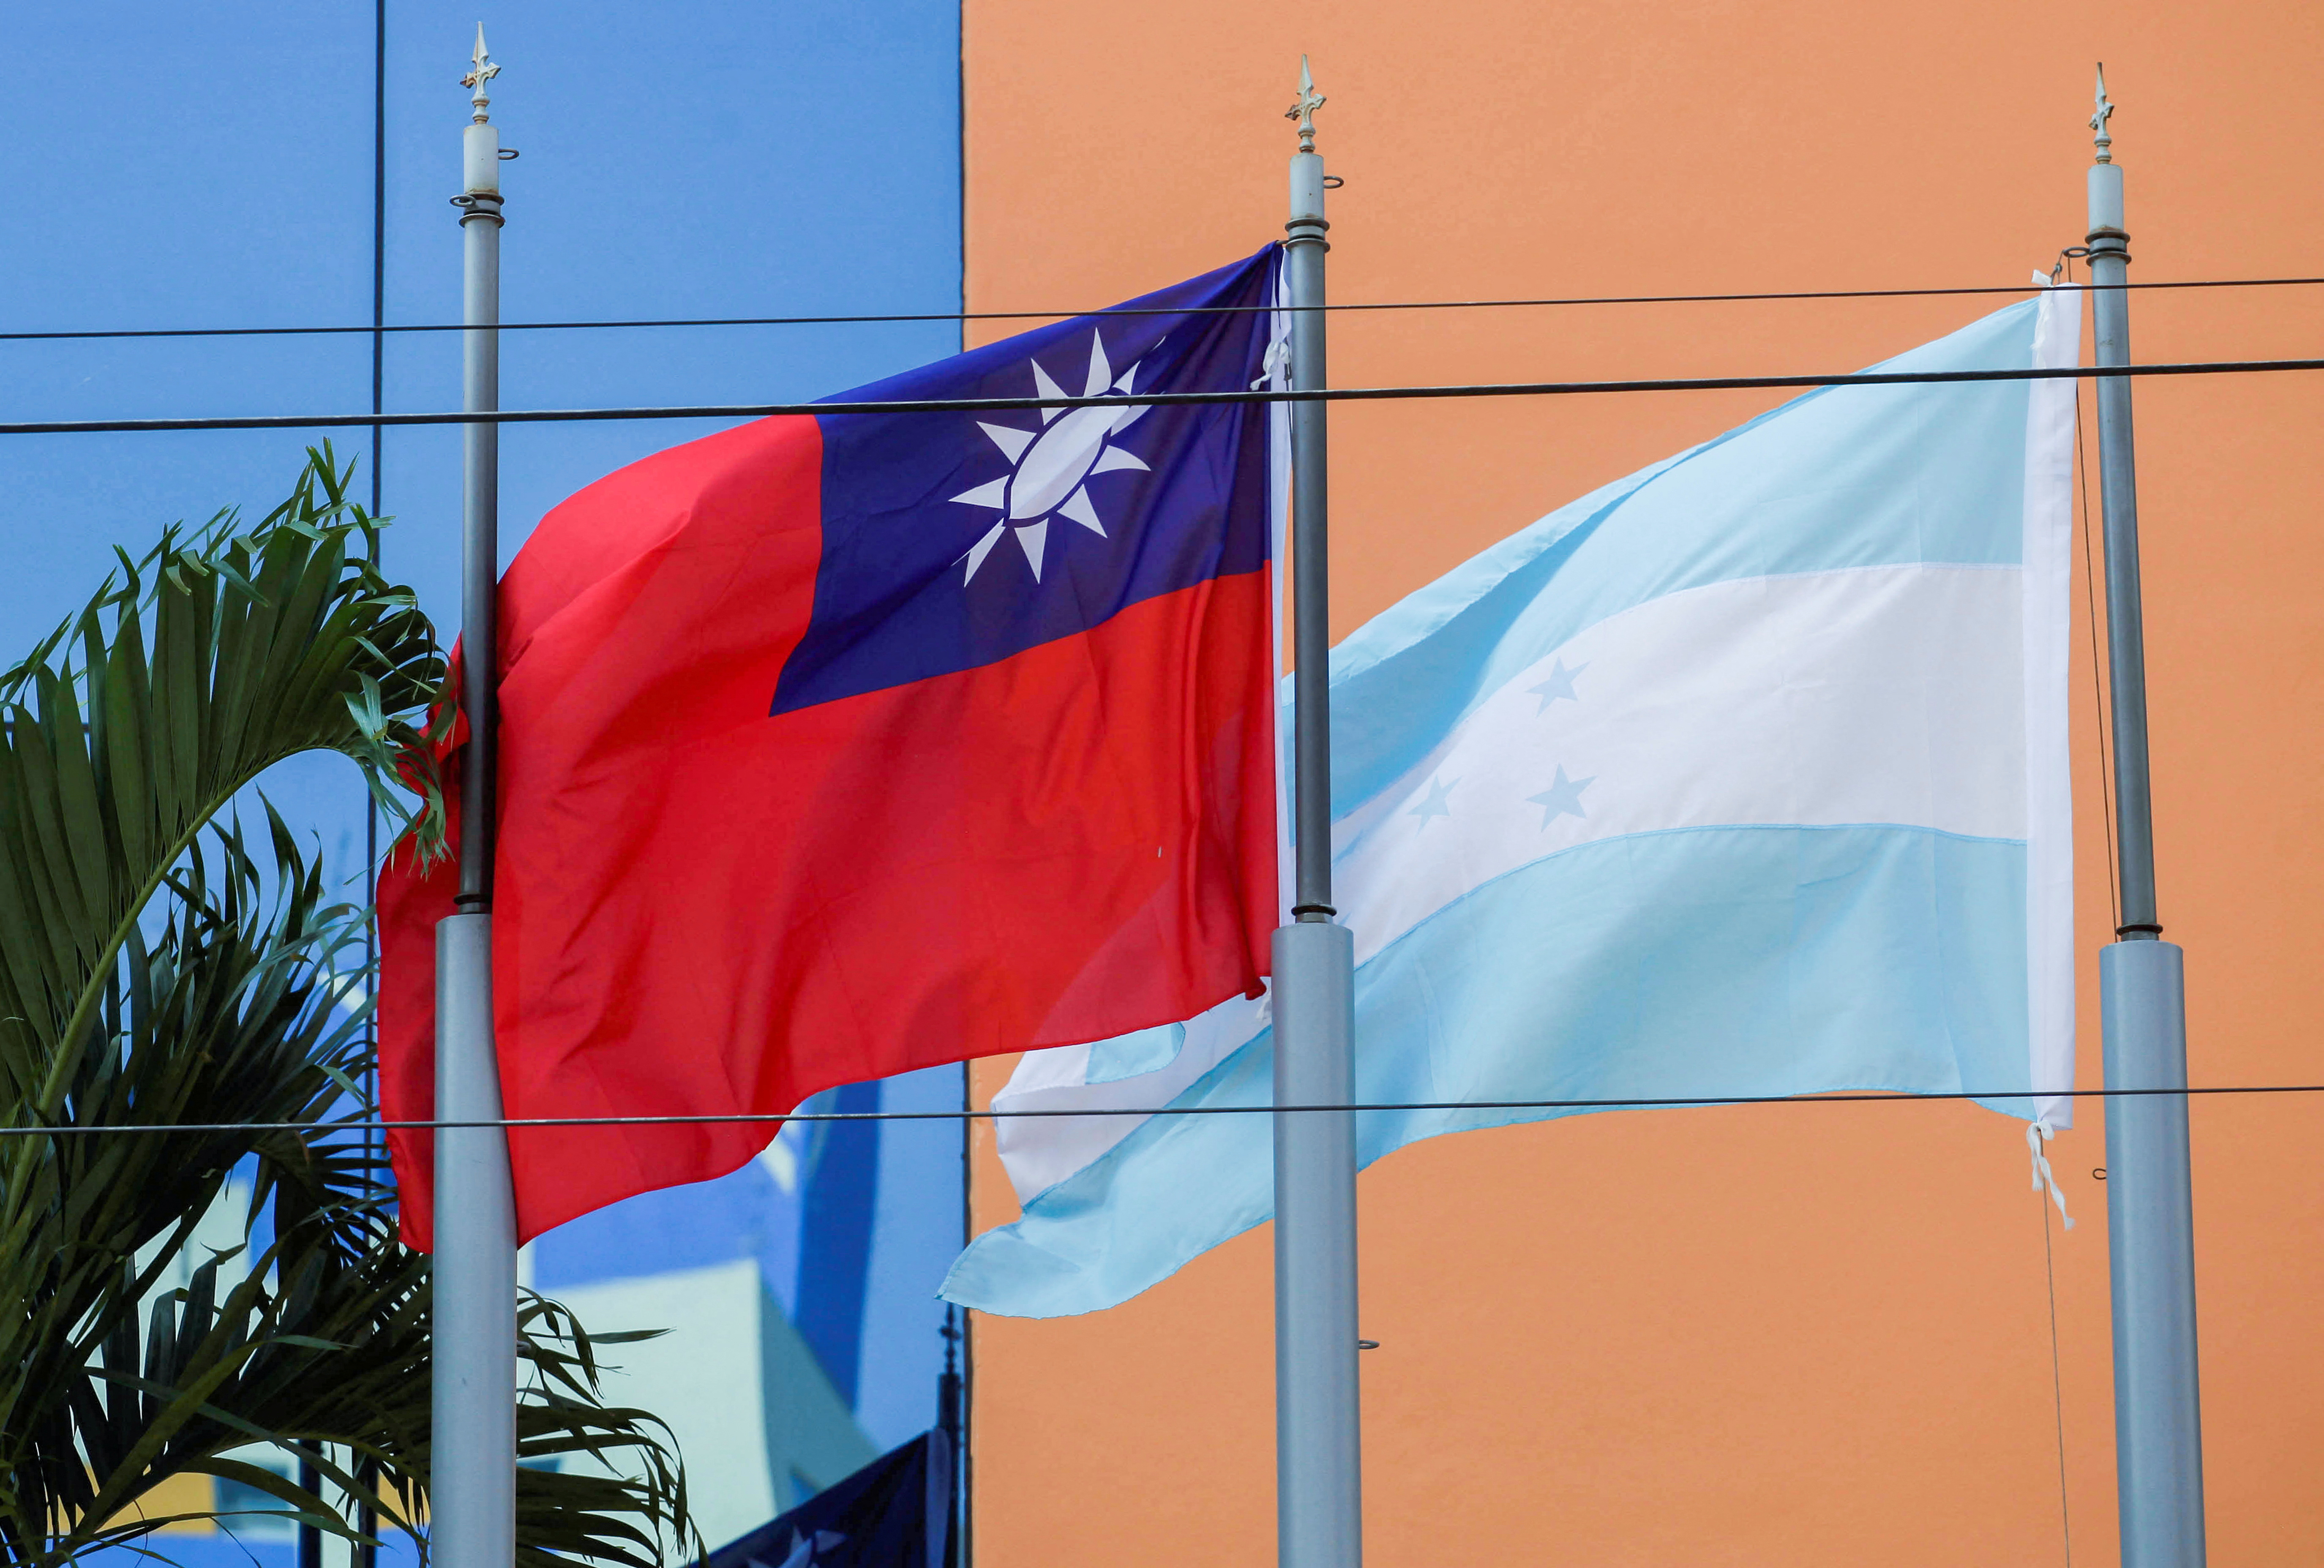 The flags of Taiwan and Honduras flutter in the wind outside the Taiwan Embassy in Tegucigalpa